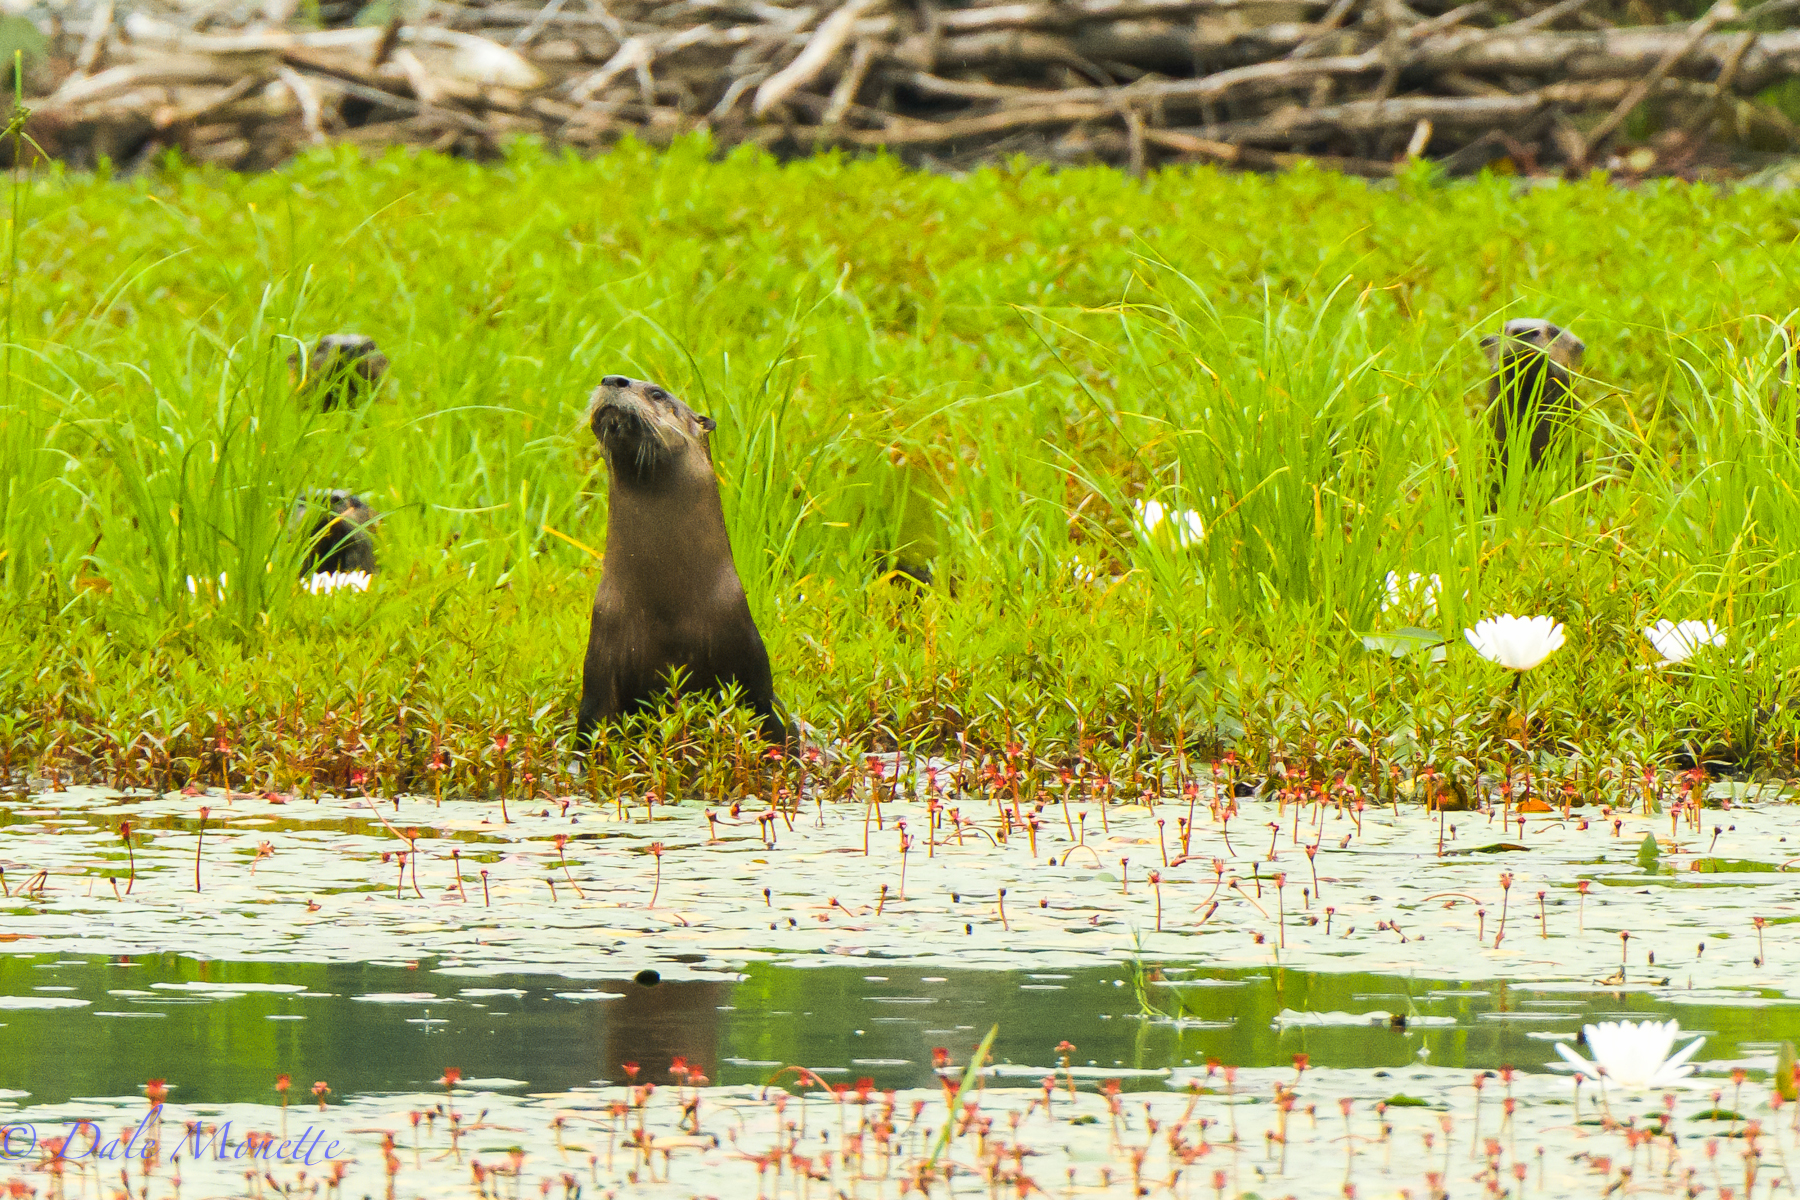   Here is the same adult otter as in the previous photo with three young ones peeking at me from behind in the tall swamp grass.  